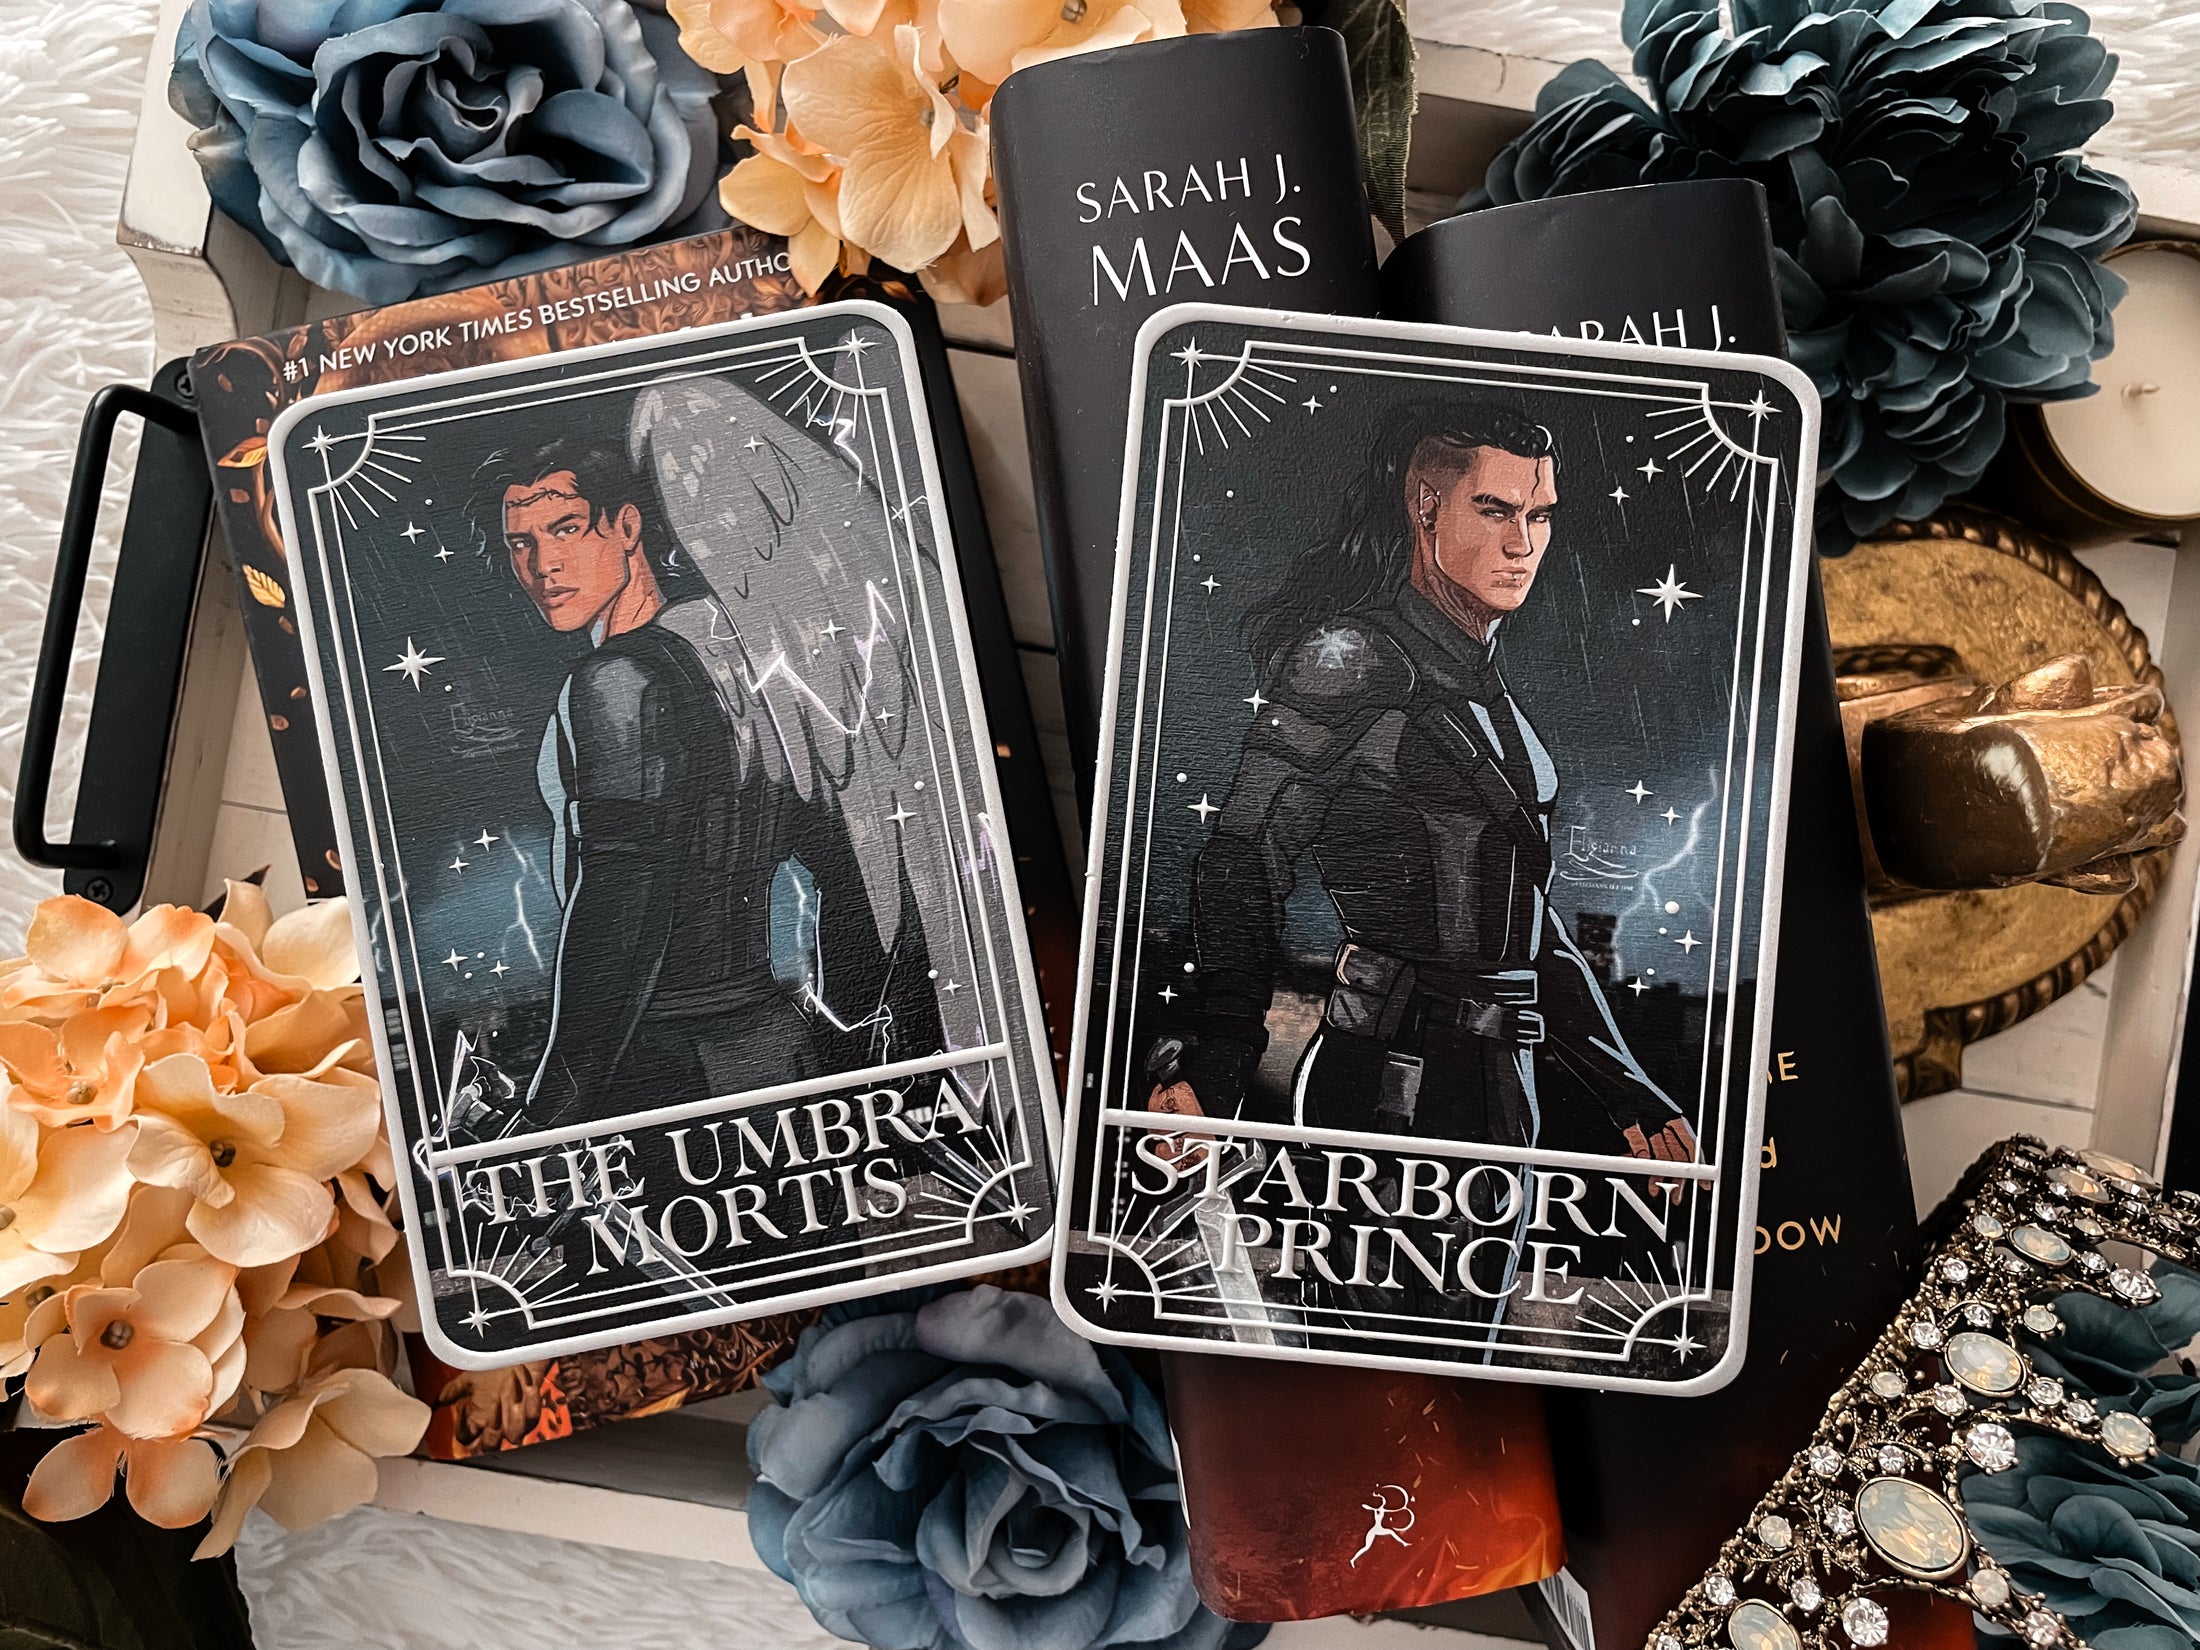 Officially Licensed SJM - "The Umbra Mortis" & "Starborn Prince" Character Cards by FireDrake Artistry™